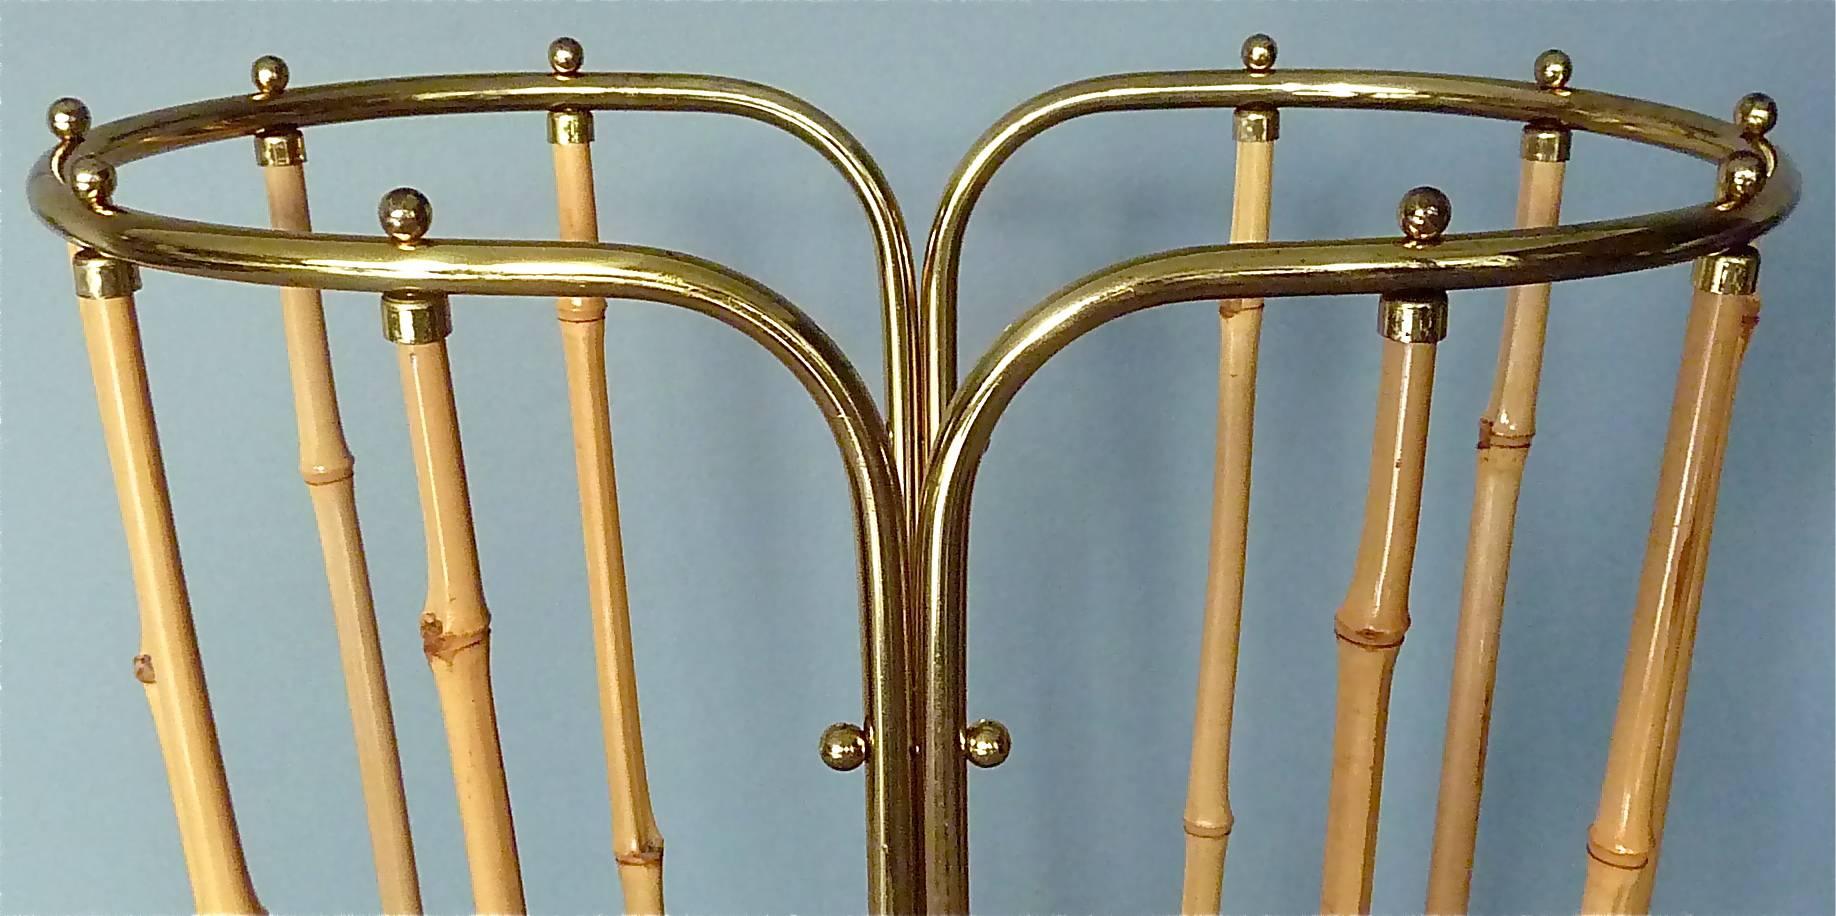 Exceptional 1950s Austrian modernist umbrella stand, which probably belongs to one of the wonderful designs by Auböck, Hagenauer, Josef Frank for Haus & Garten or Kalmar. It´s made of bamboo and tubular brass with lovely small ball screw nuts.